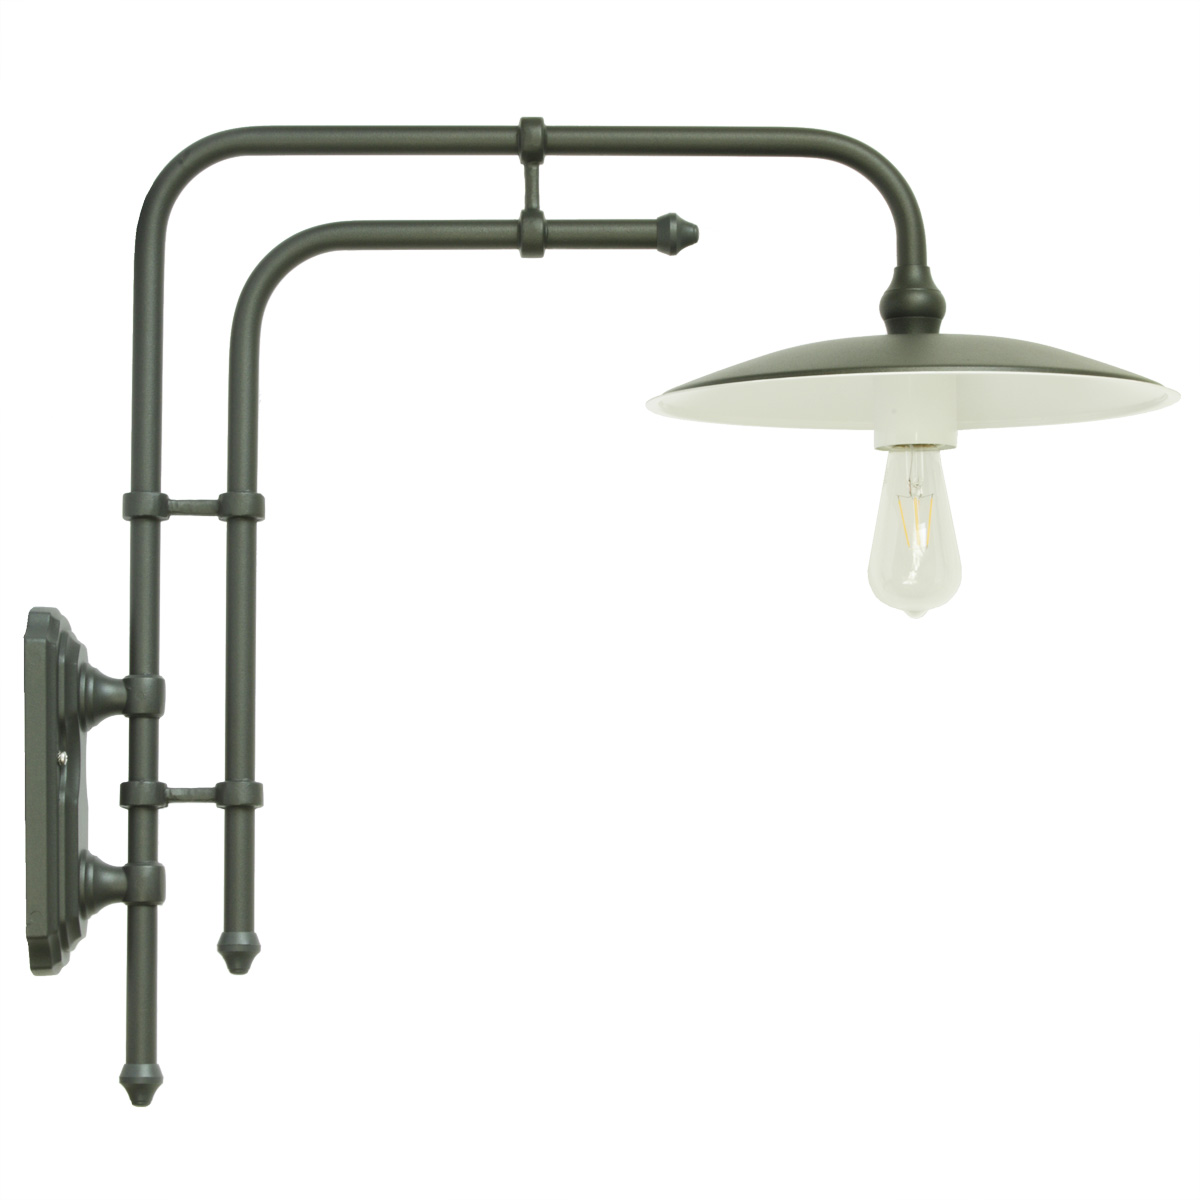 Wall Light for Outdoors without Glass and a Double-pipe Arm